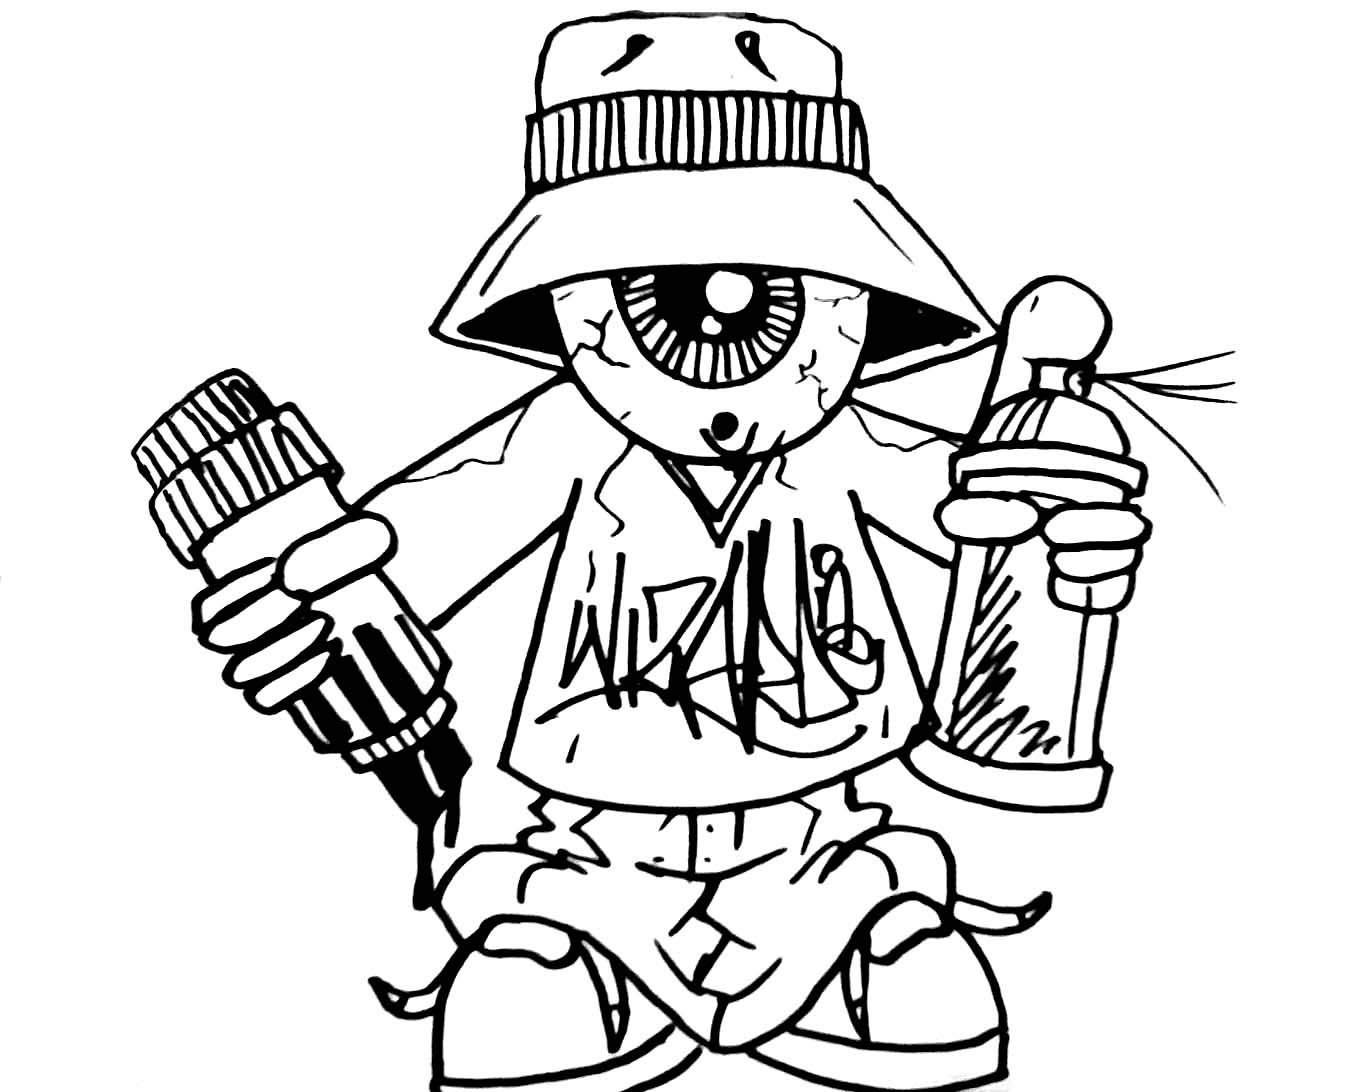 Download Graffiti Coloring Pages for Teens and Adults - Best ...